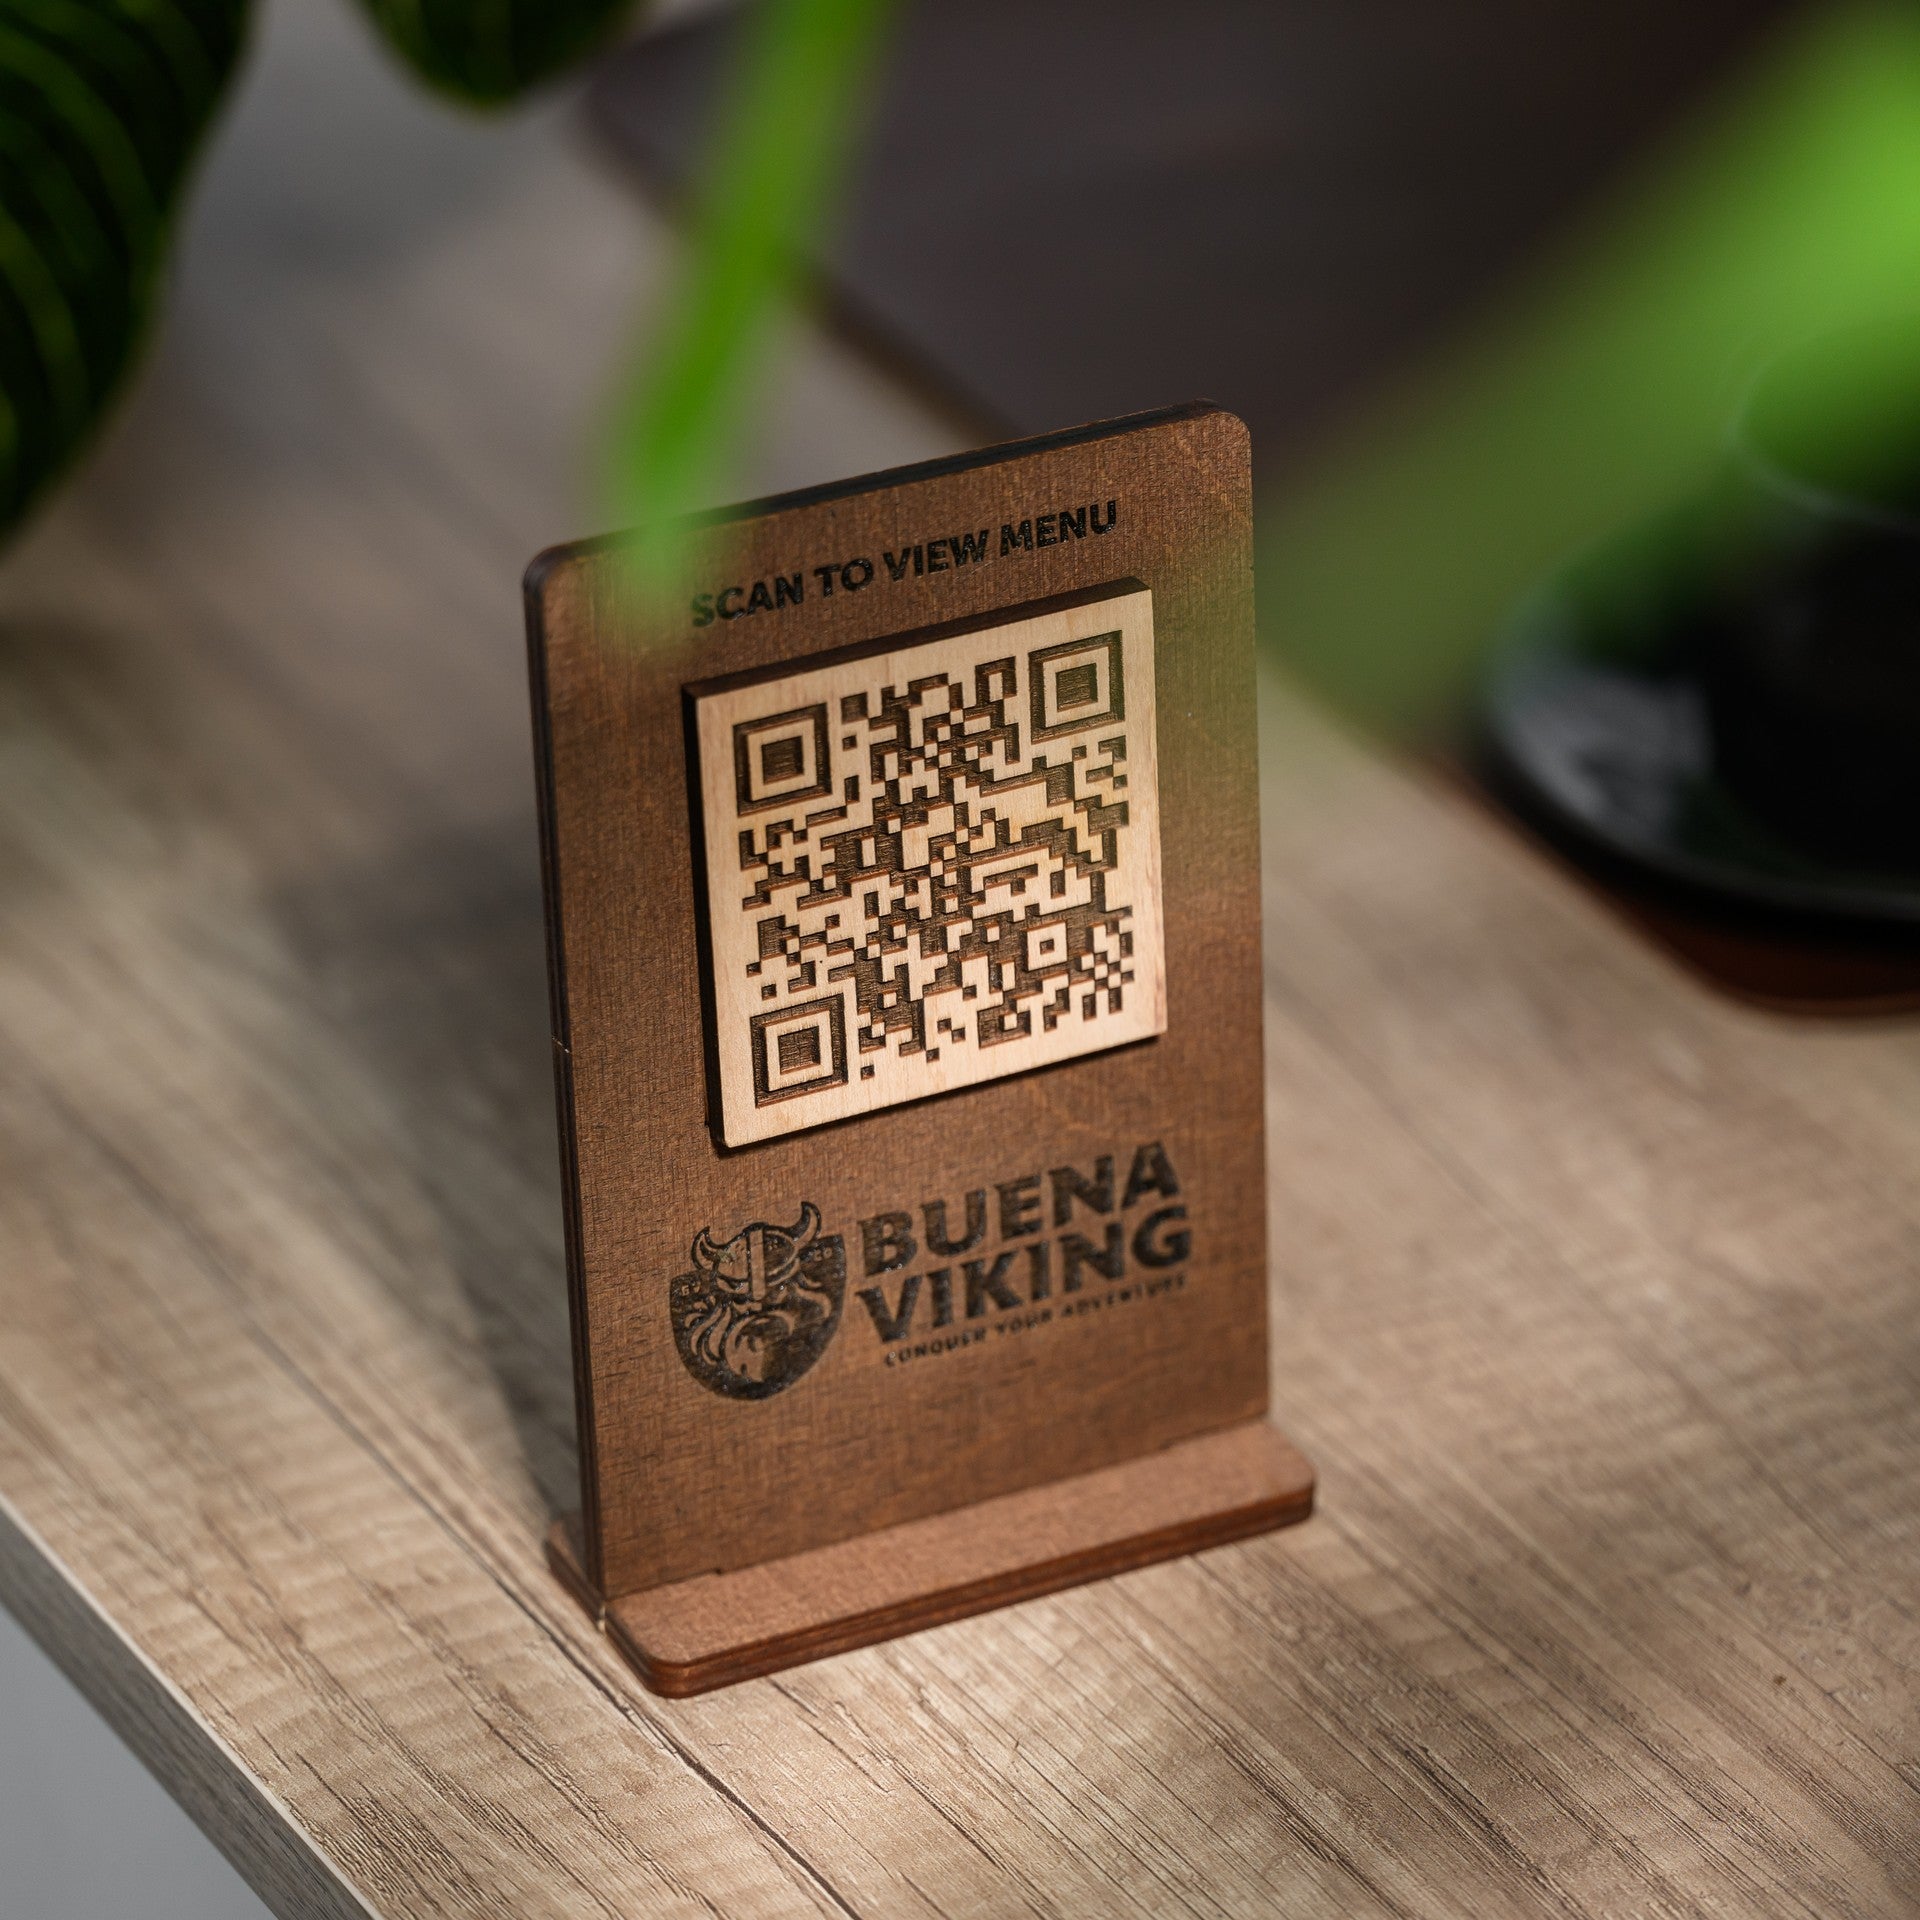 Menu QR Sign Stand for efficient bar service. Touchless menu display with scannable QR code for quick and easy access.